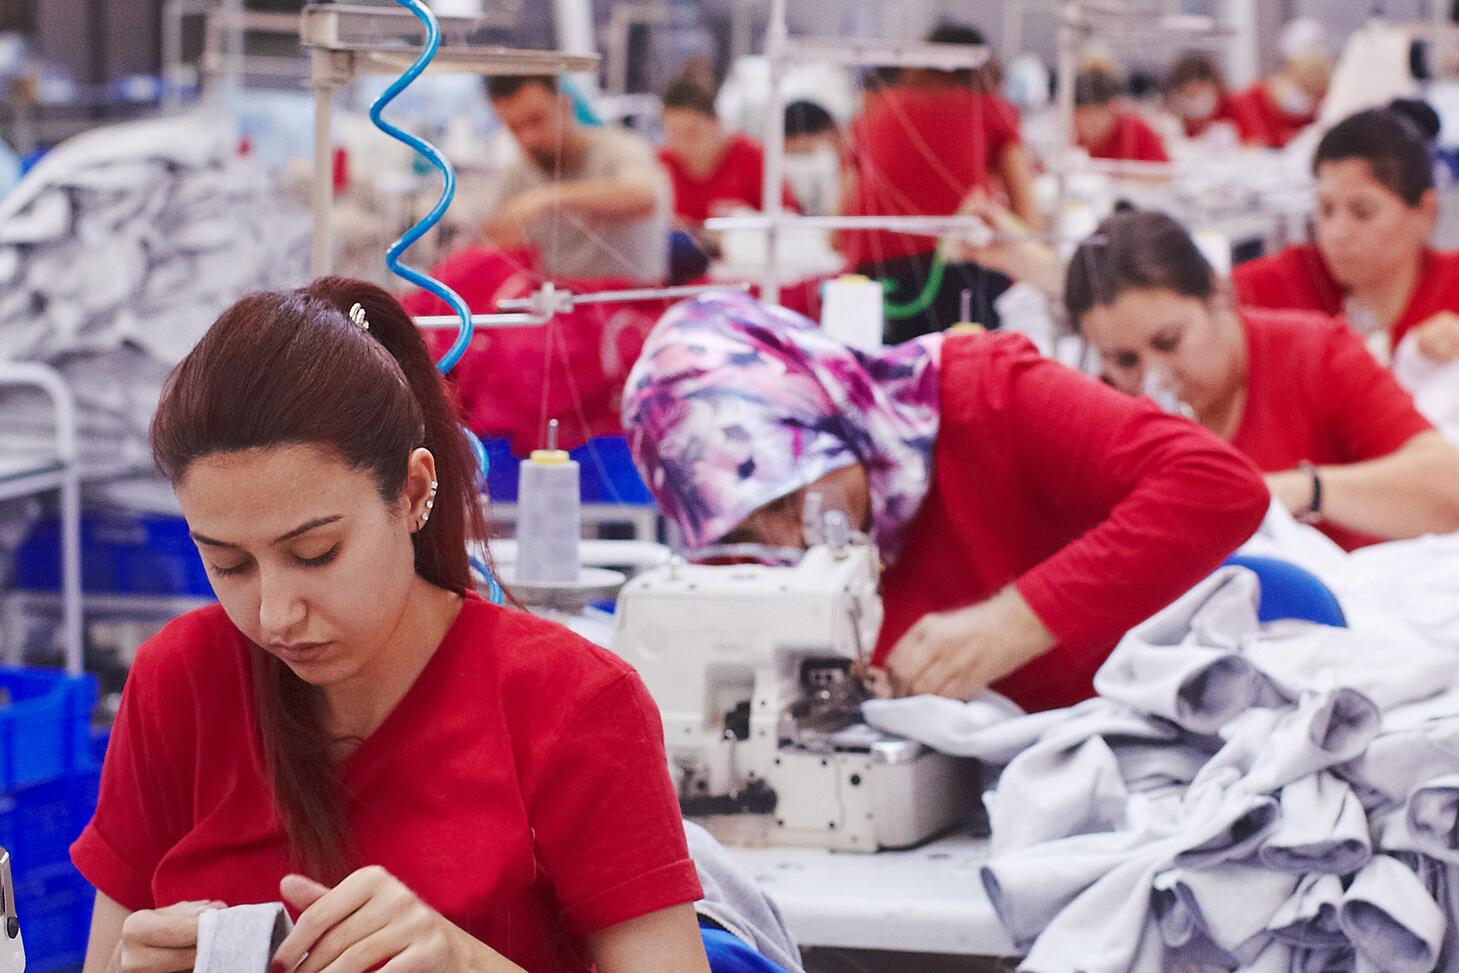 Women working in a factory sewing clothing.